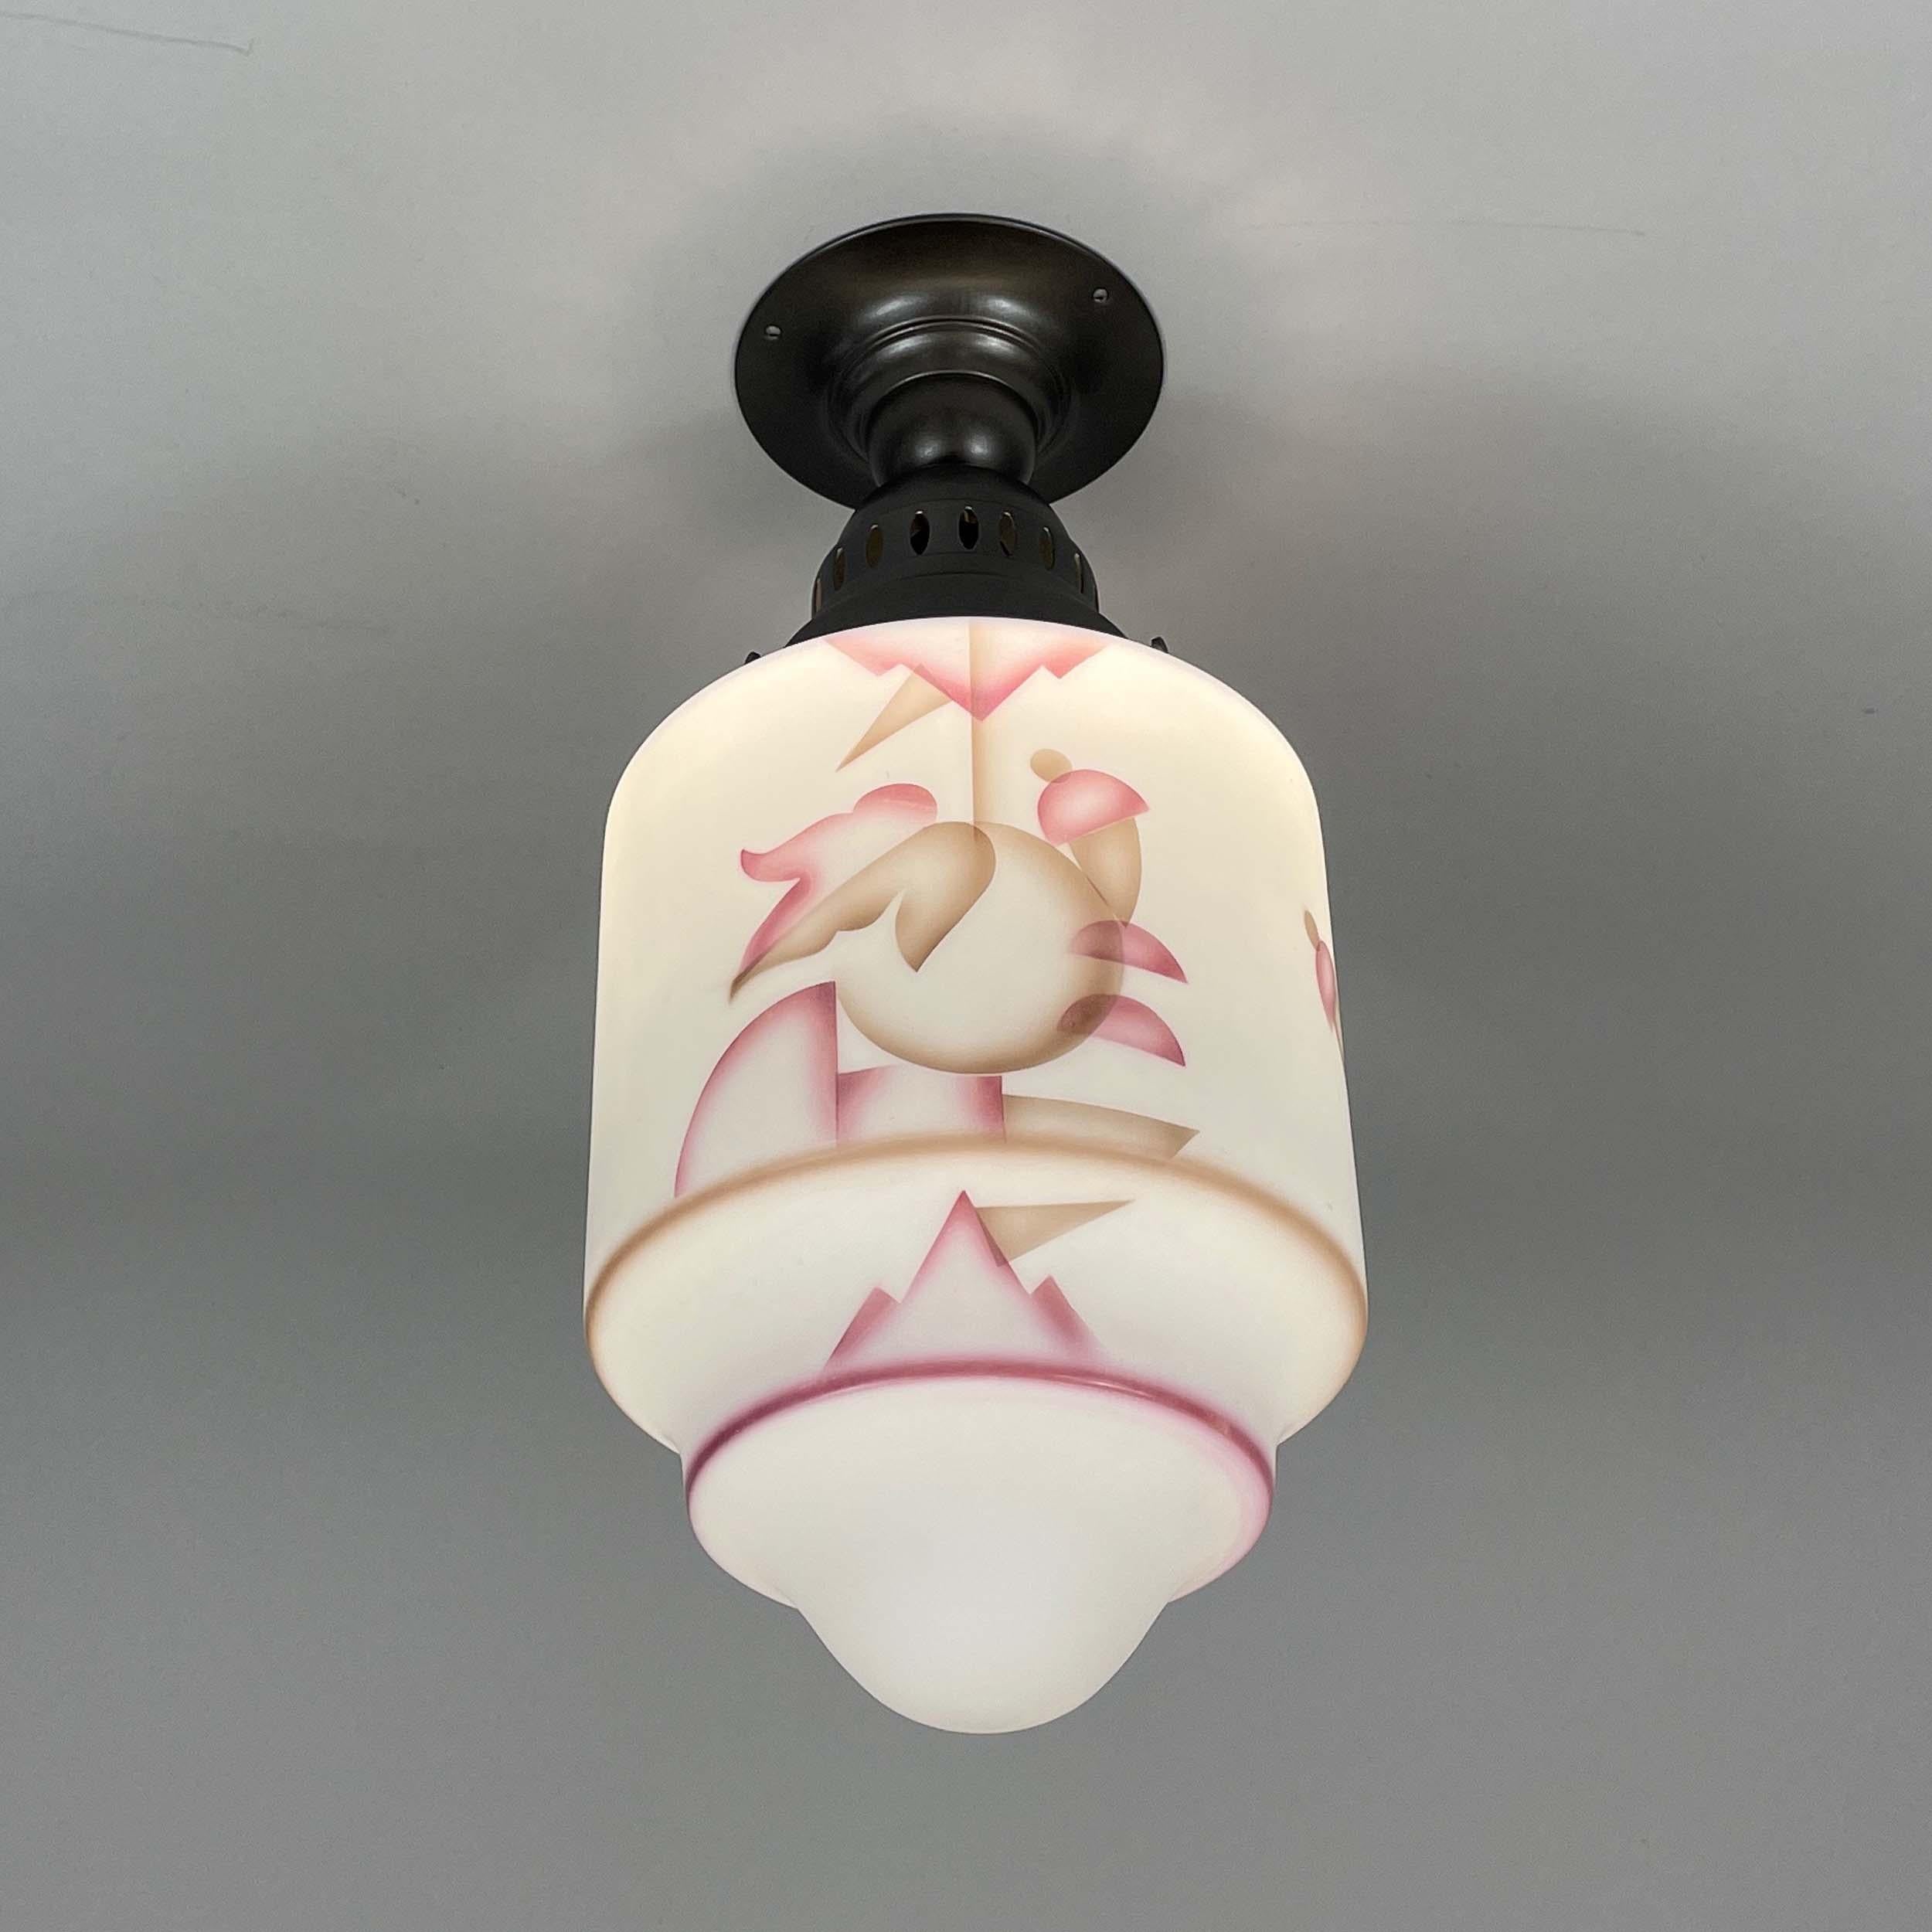 Art Deco Frosted Glass Paintbrush & Burnished Metal Flush Mount, Germany 1930s For Sale 3